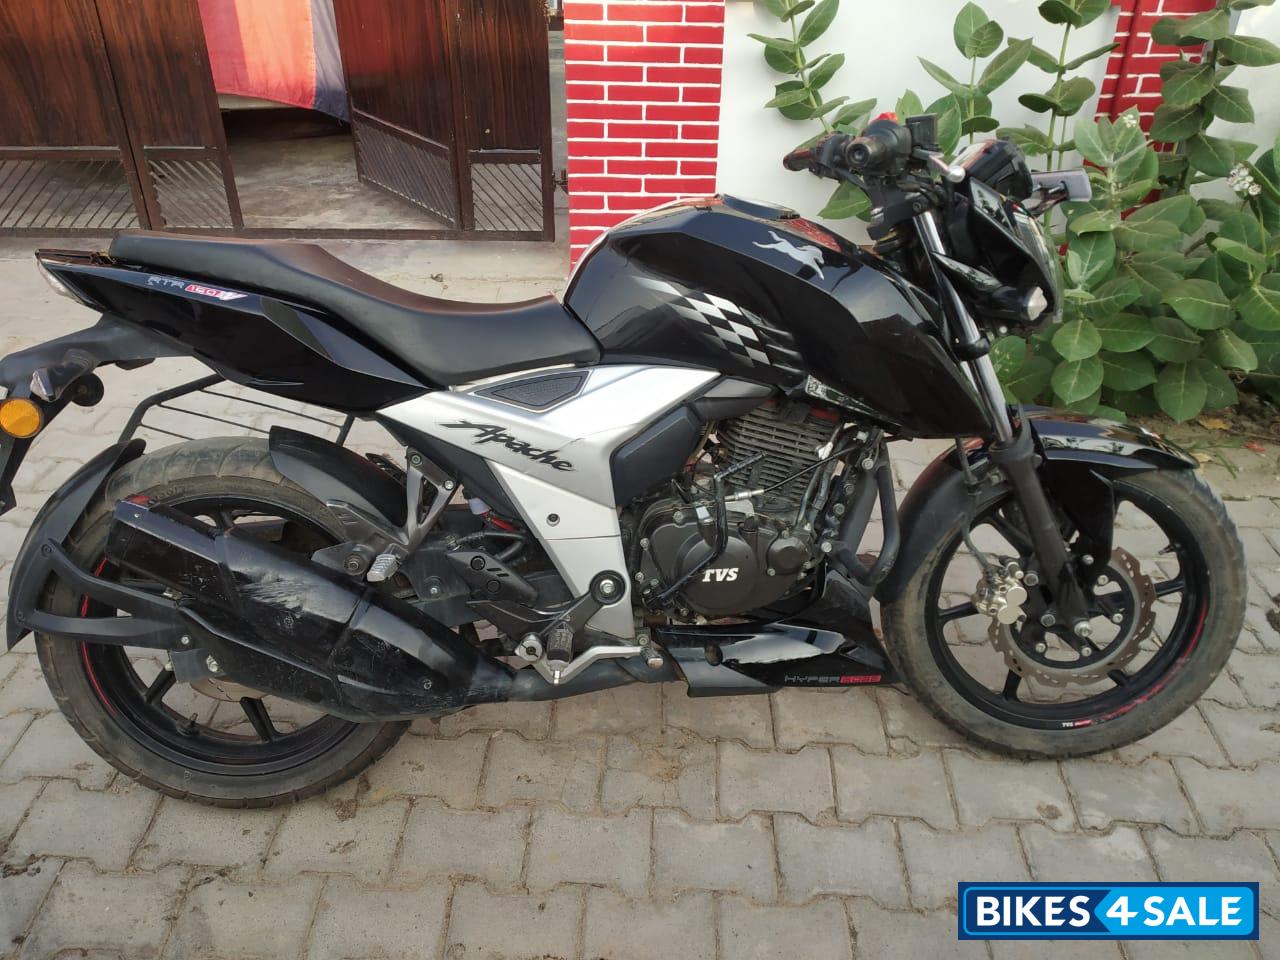 Used Tvs Apache Rtr 160 4v For Sale In Allahabad Id 250294